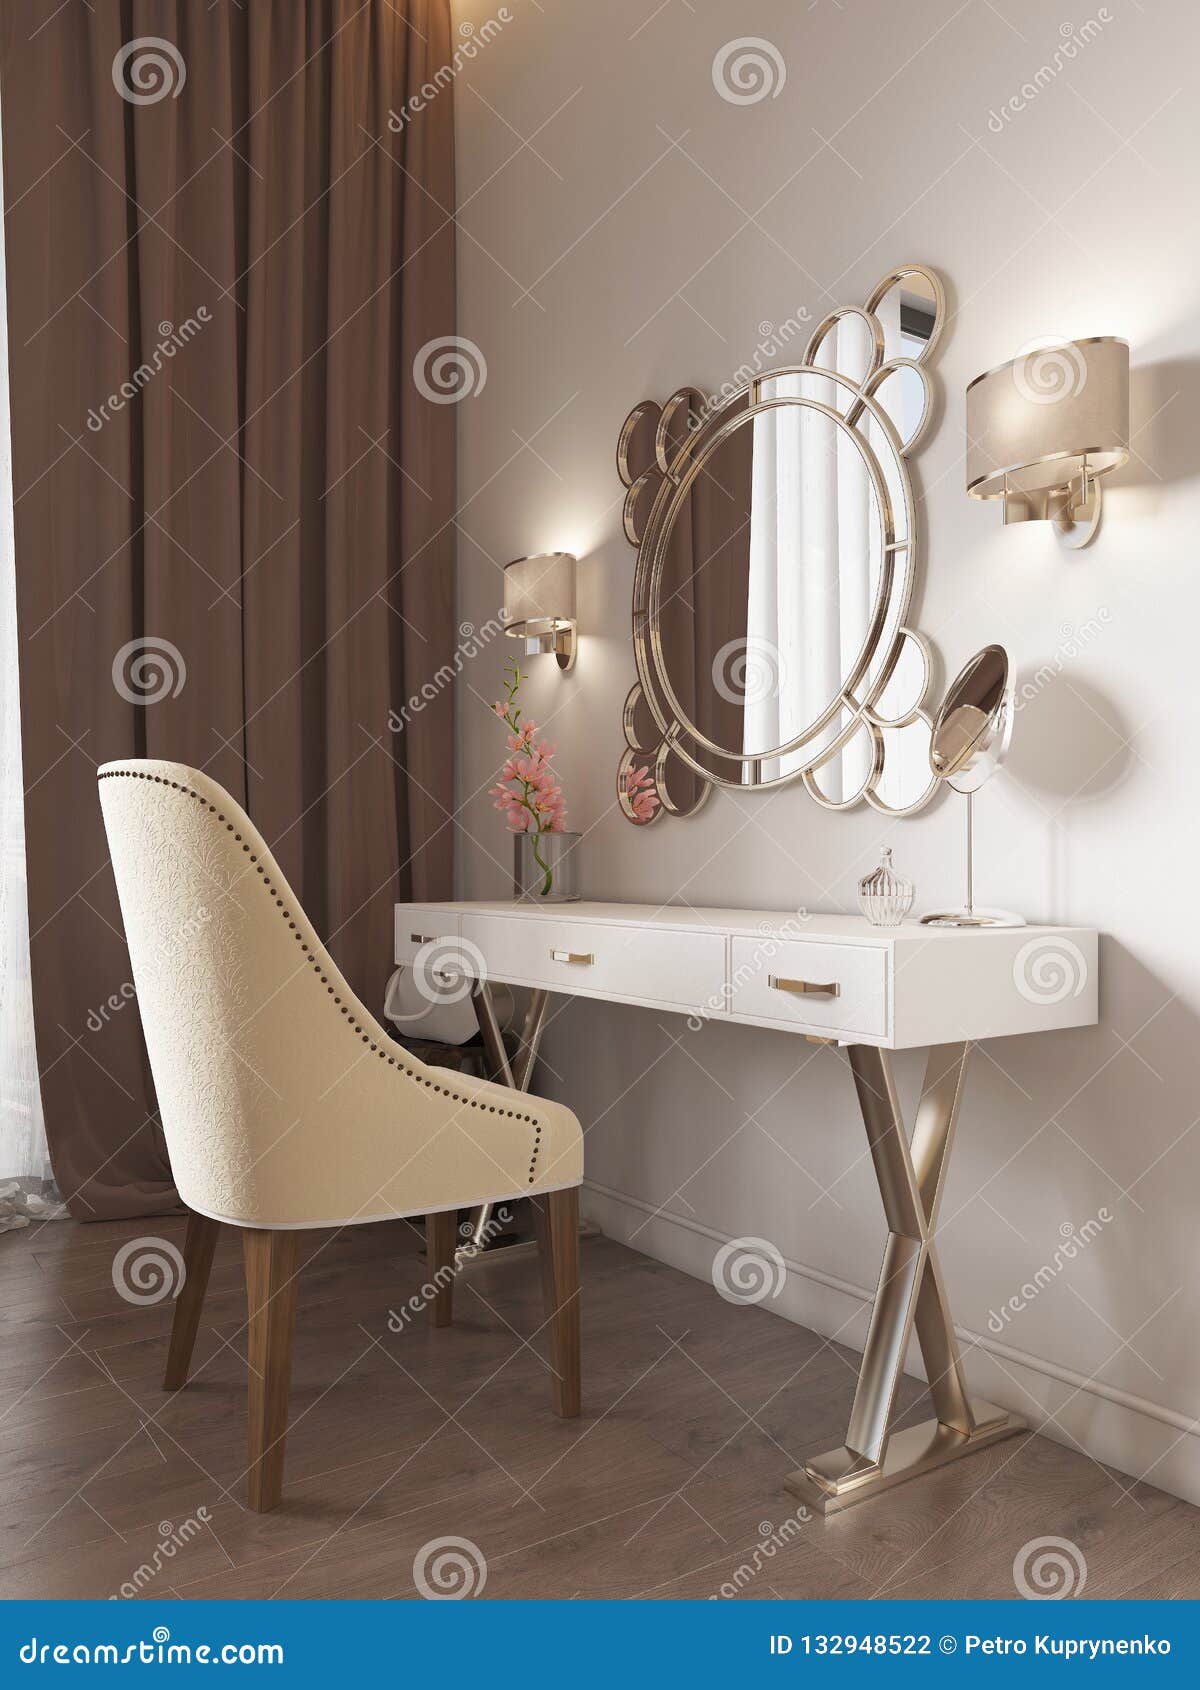 White Dressing Table With Decor Mirror And Sconces On The